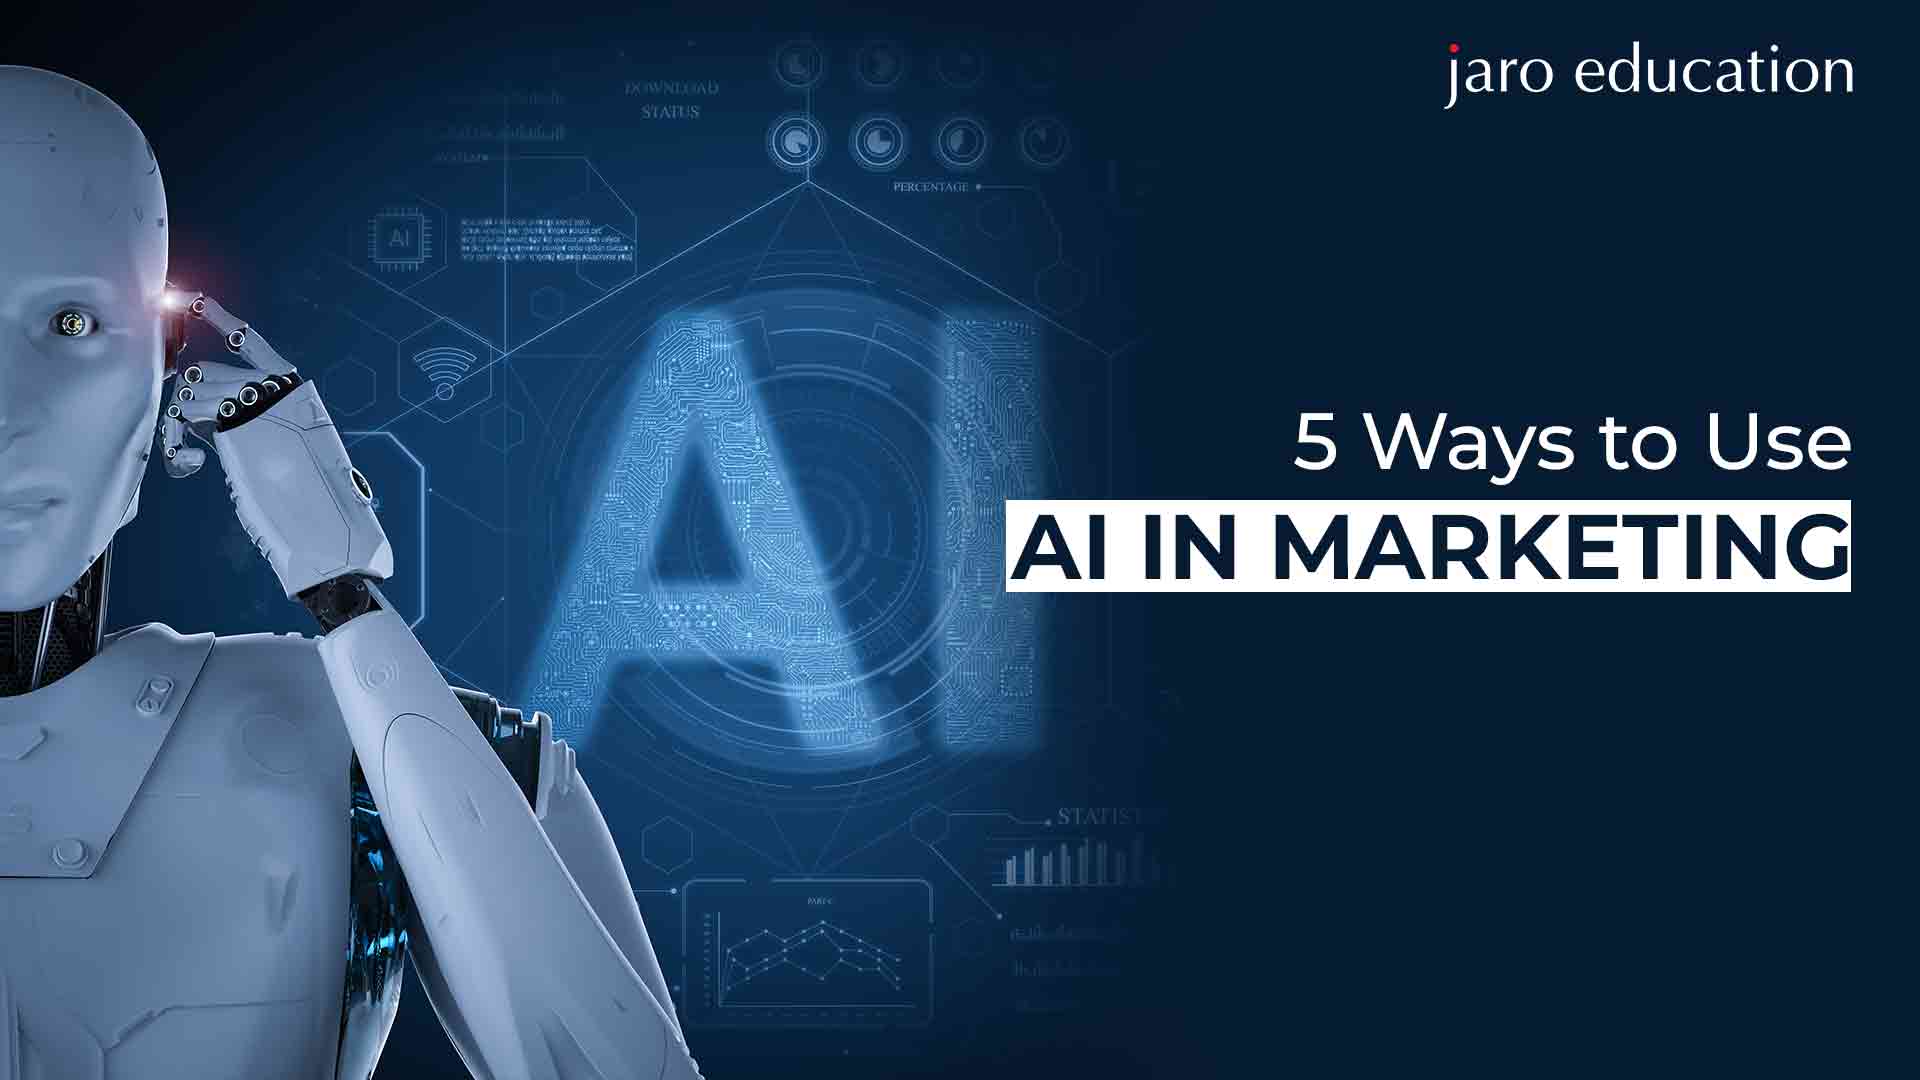 5 Ways to Use AI in Marketing